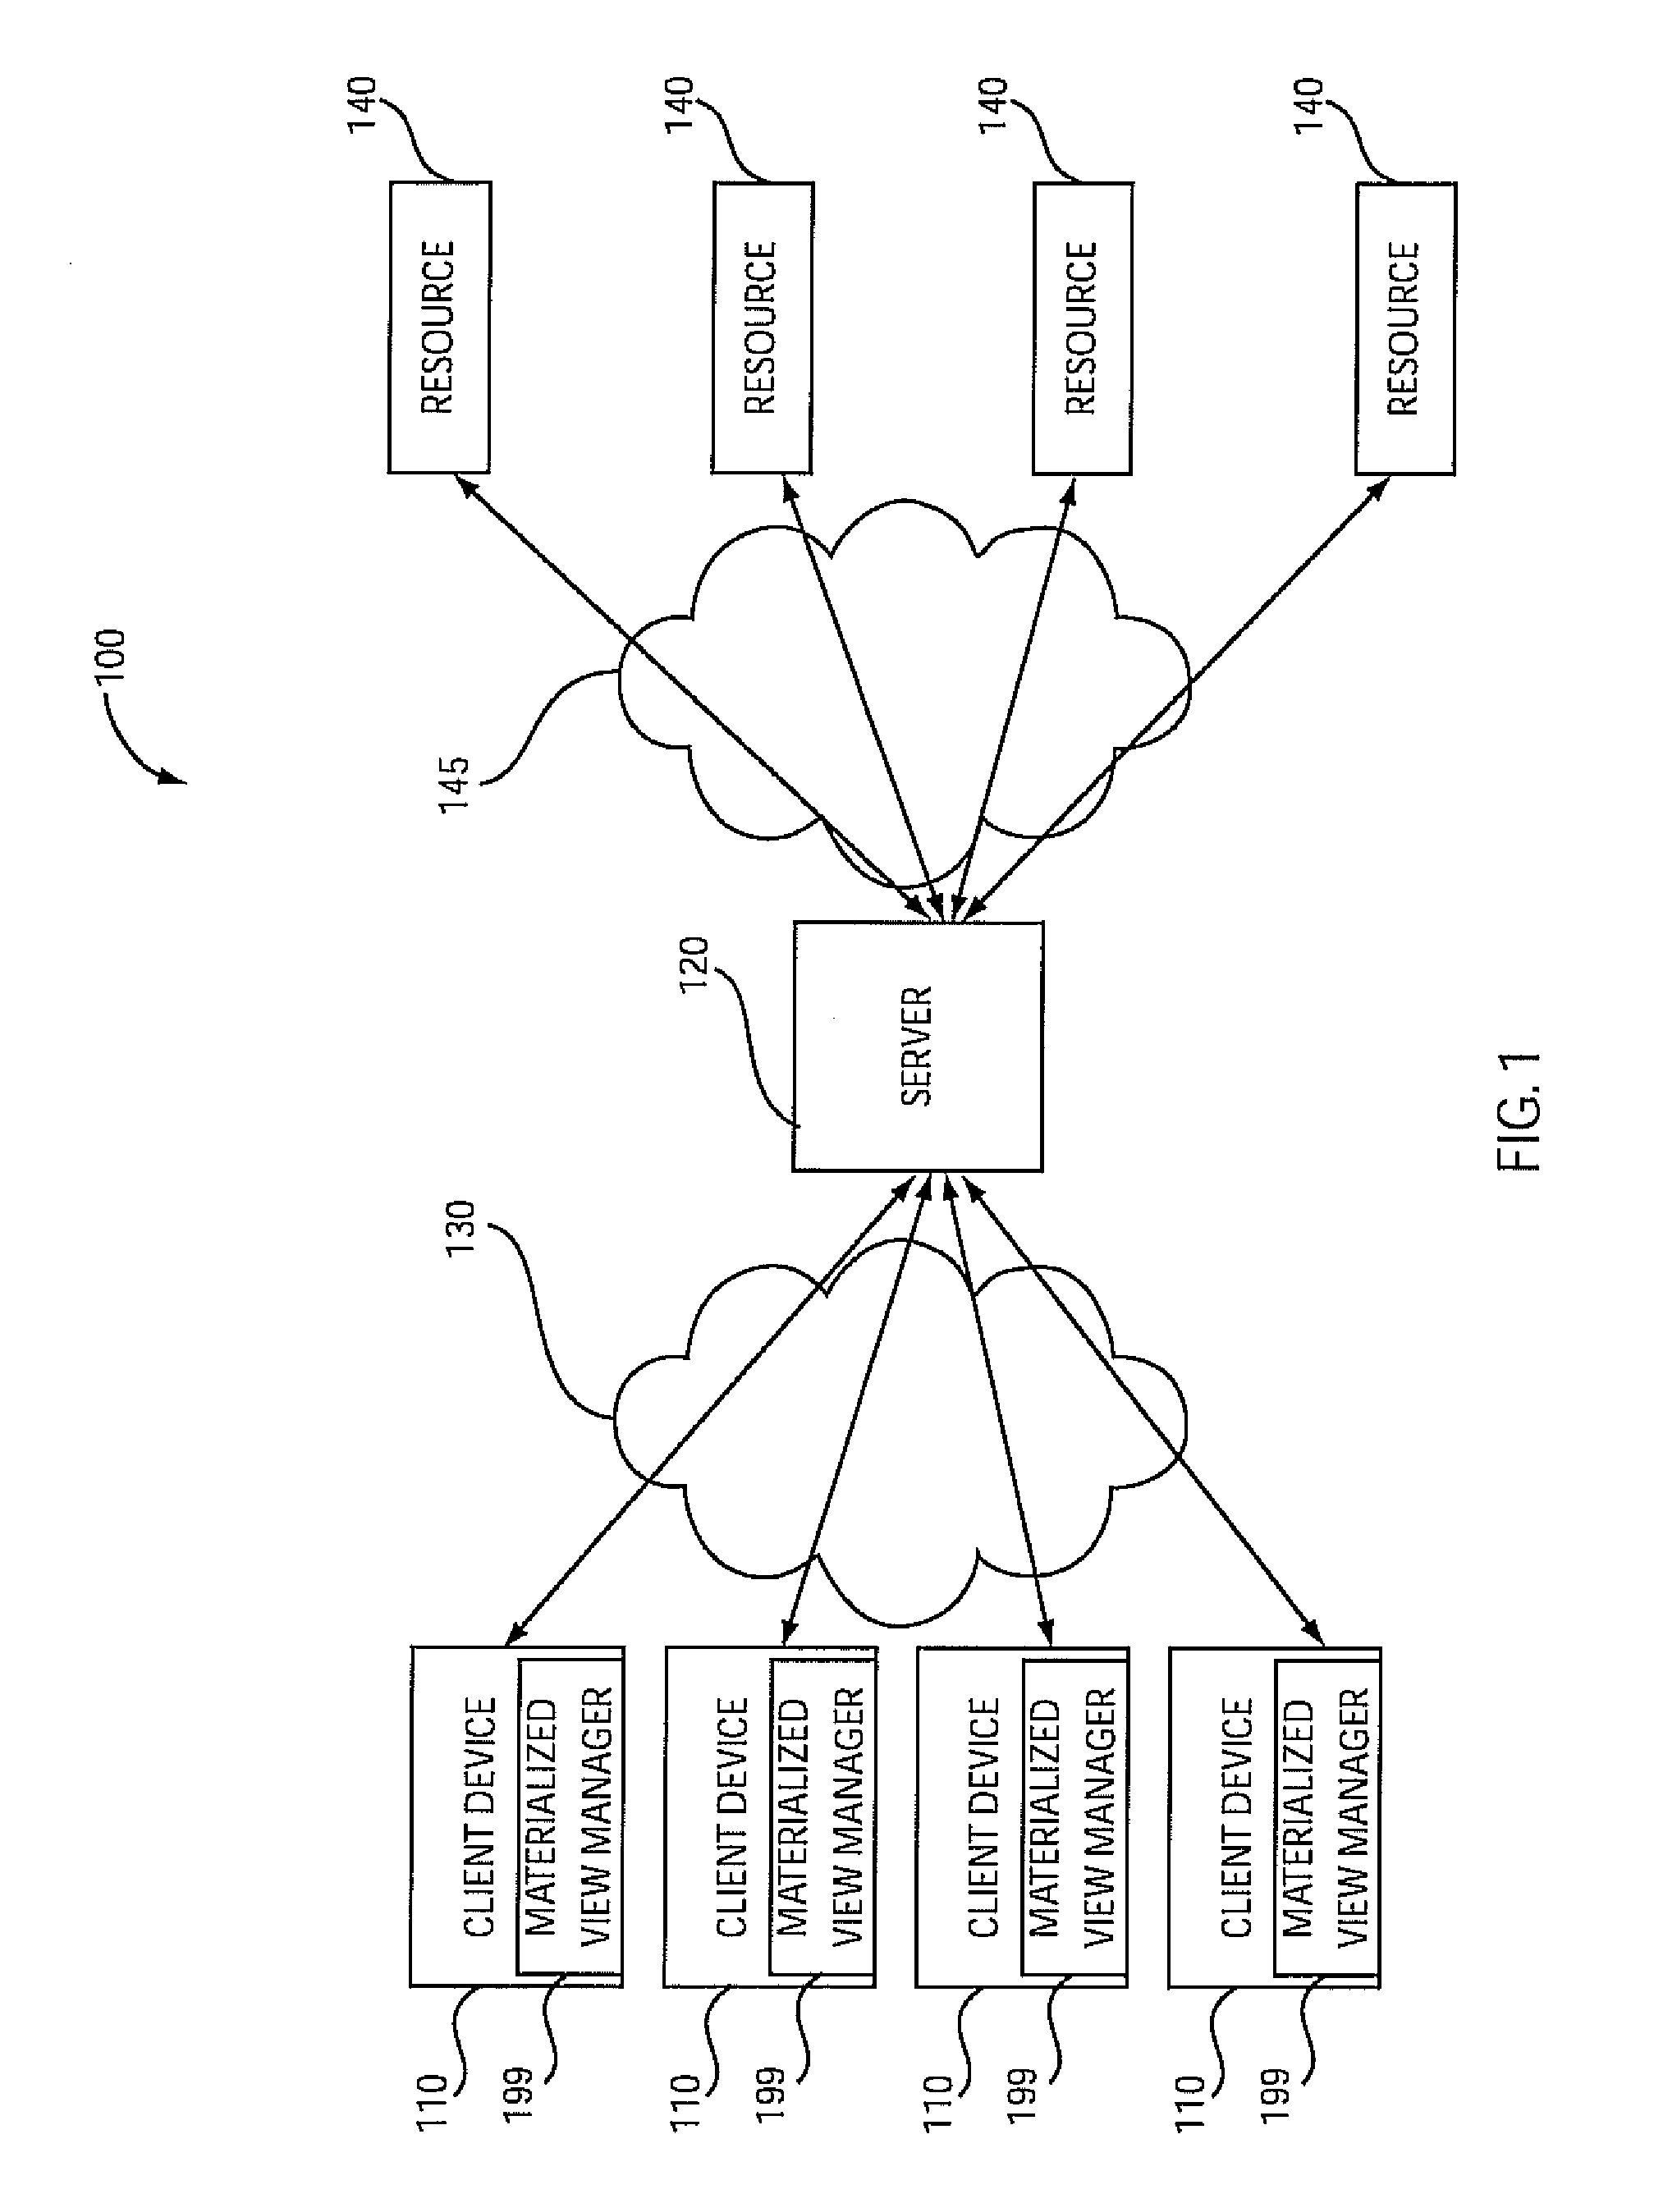 System and method for real-time materialized view maintenance